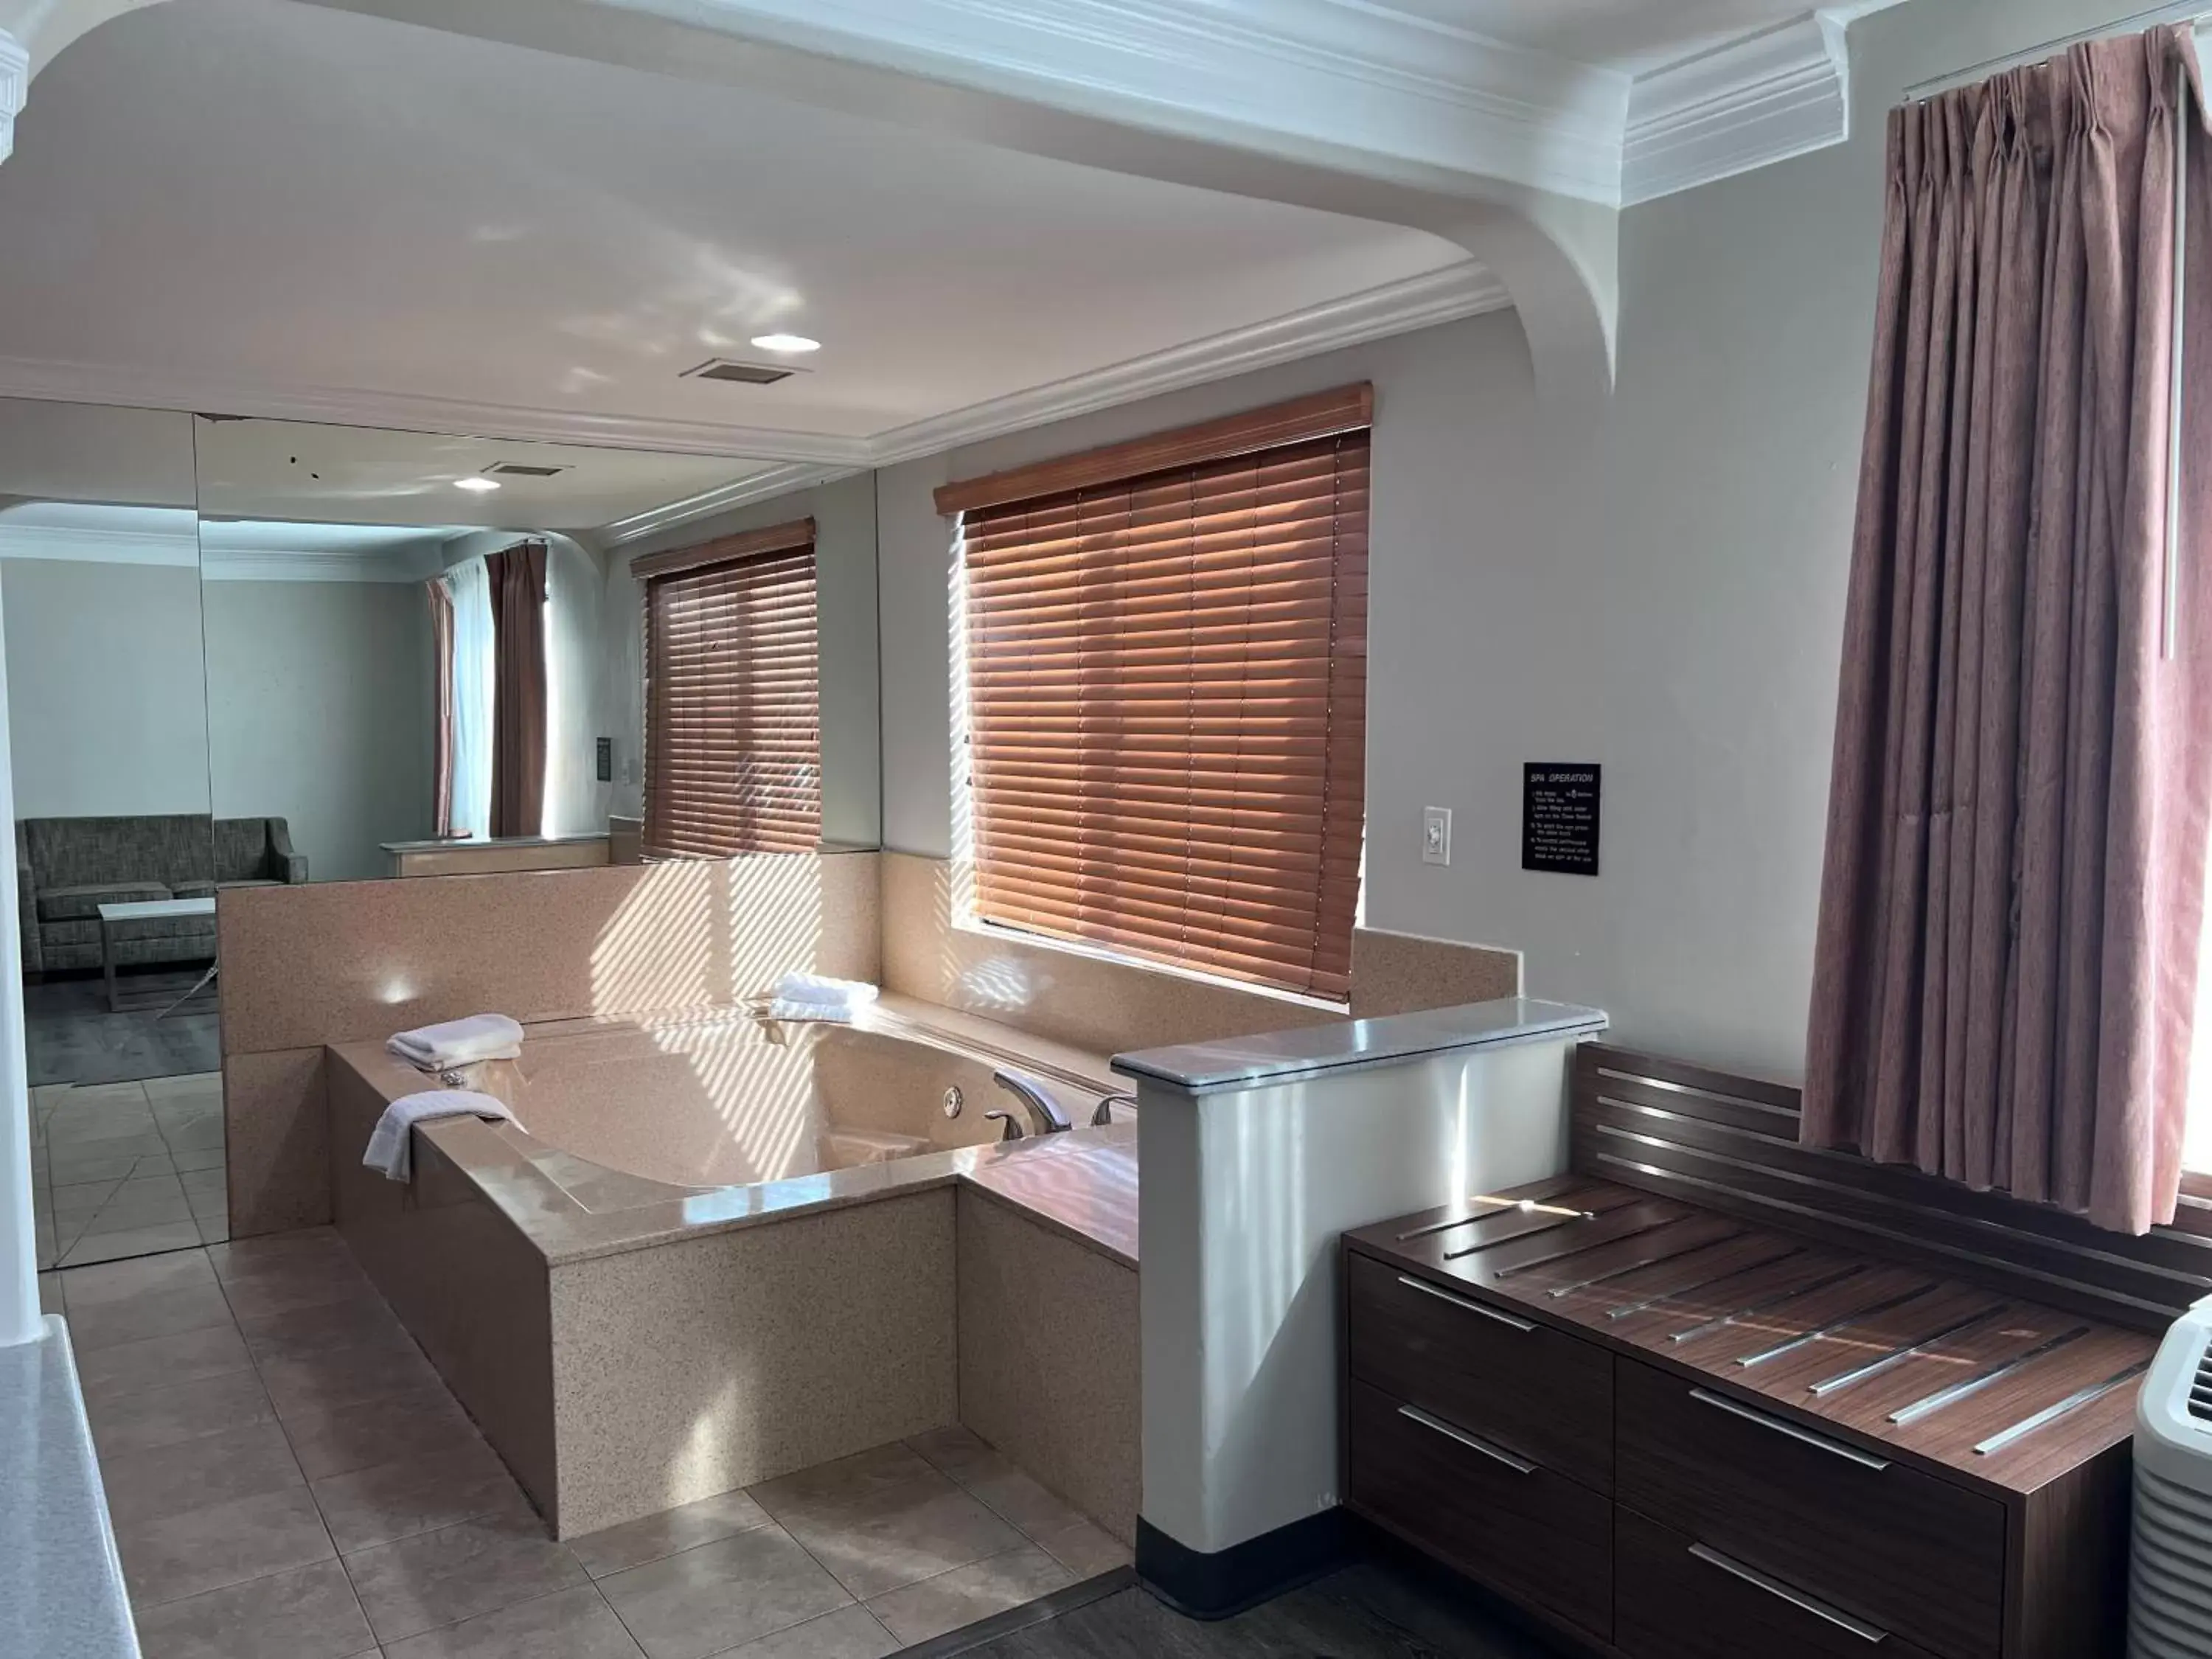 Photo of the whole room, Bathroom in Best Western Plus Suites Hotel - Los Angeles LAX Airport